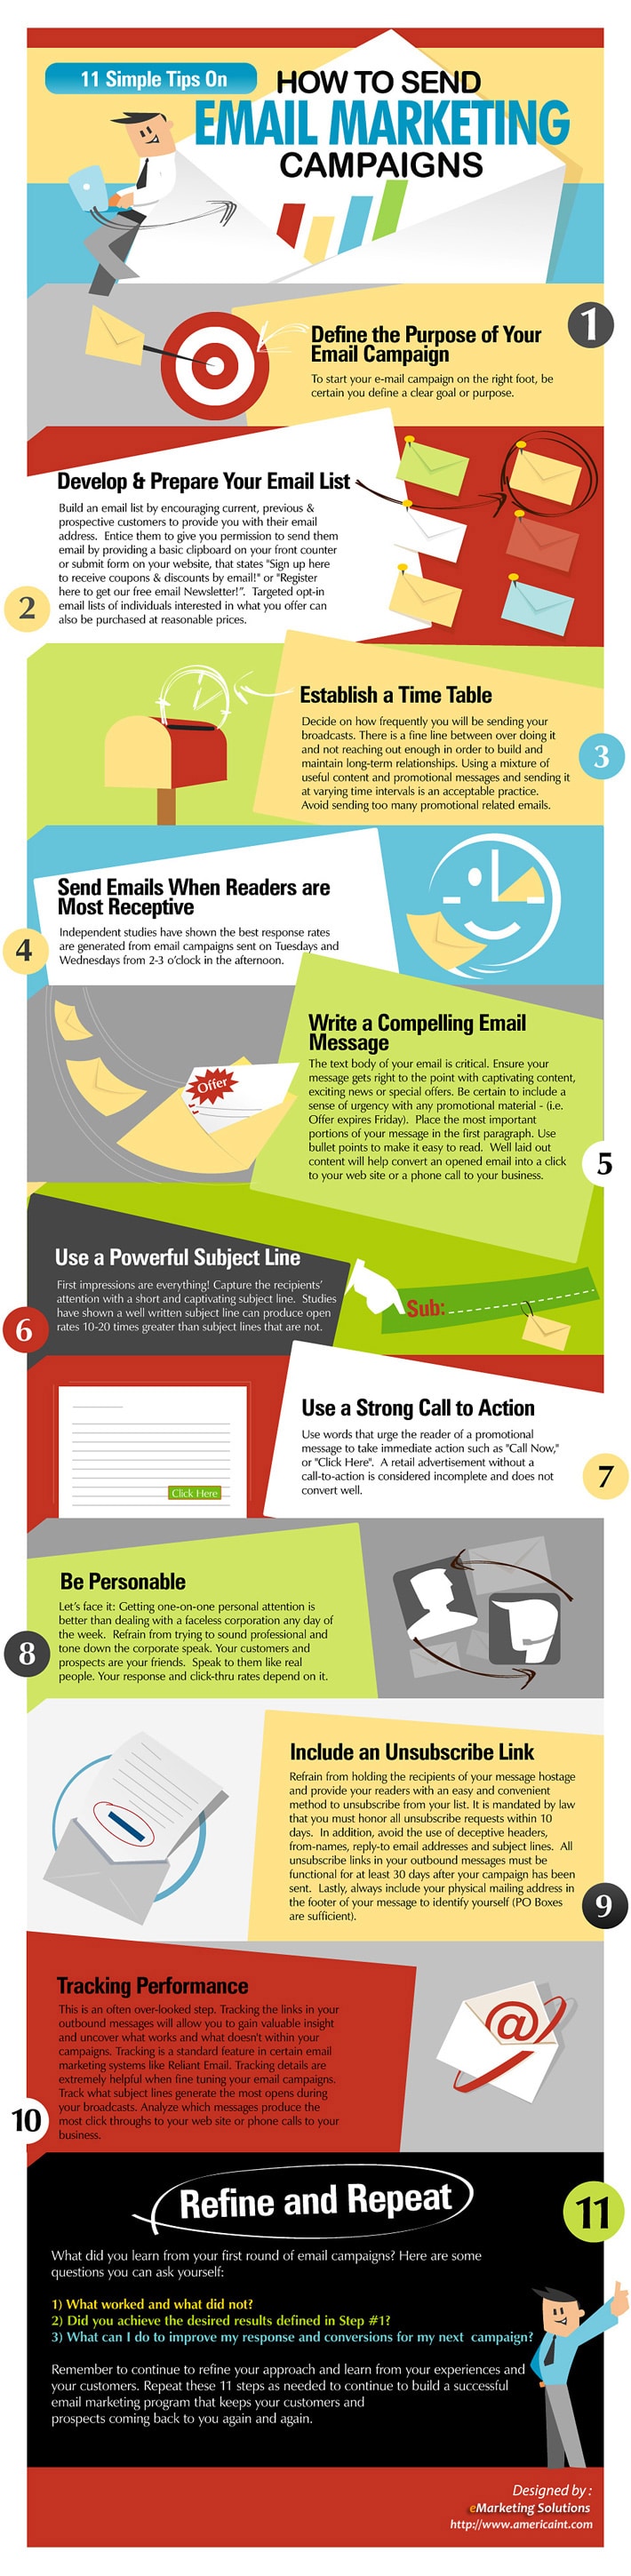 ultimate-email-marketing-guide